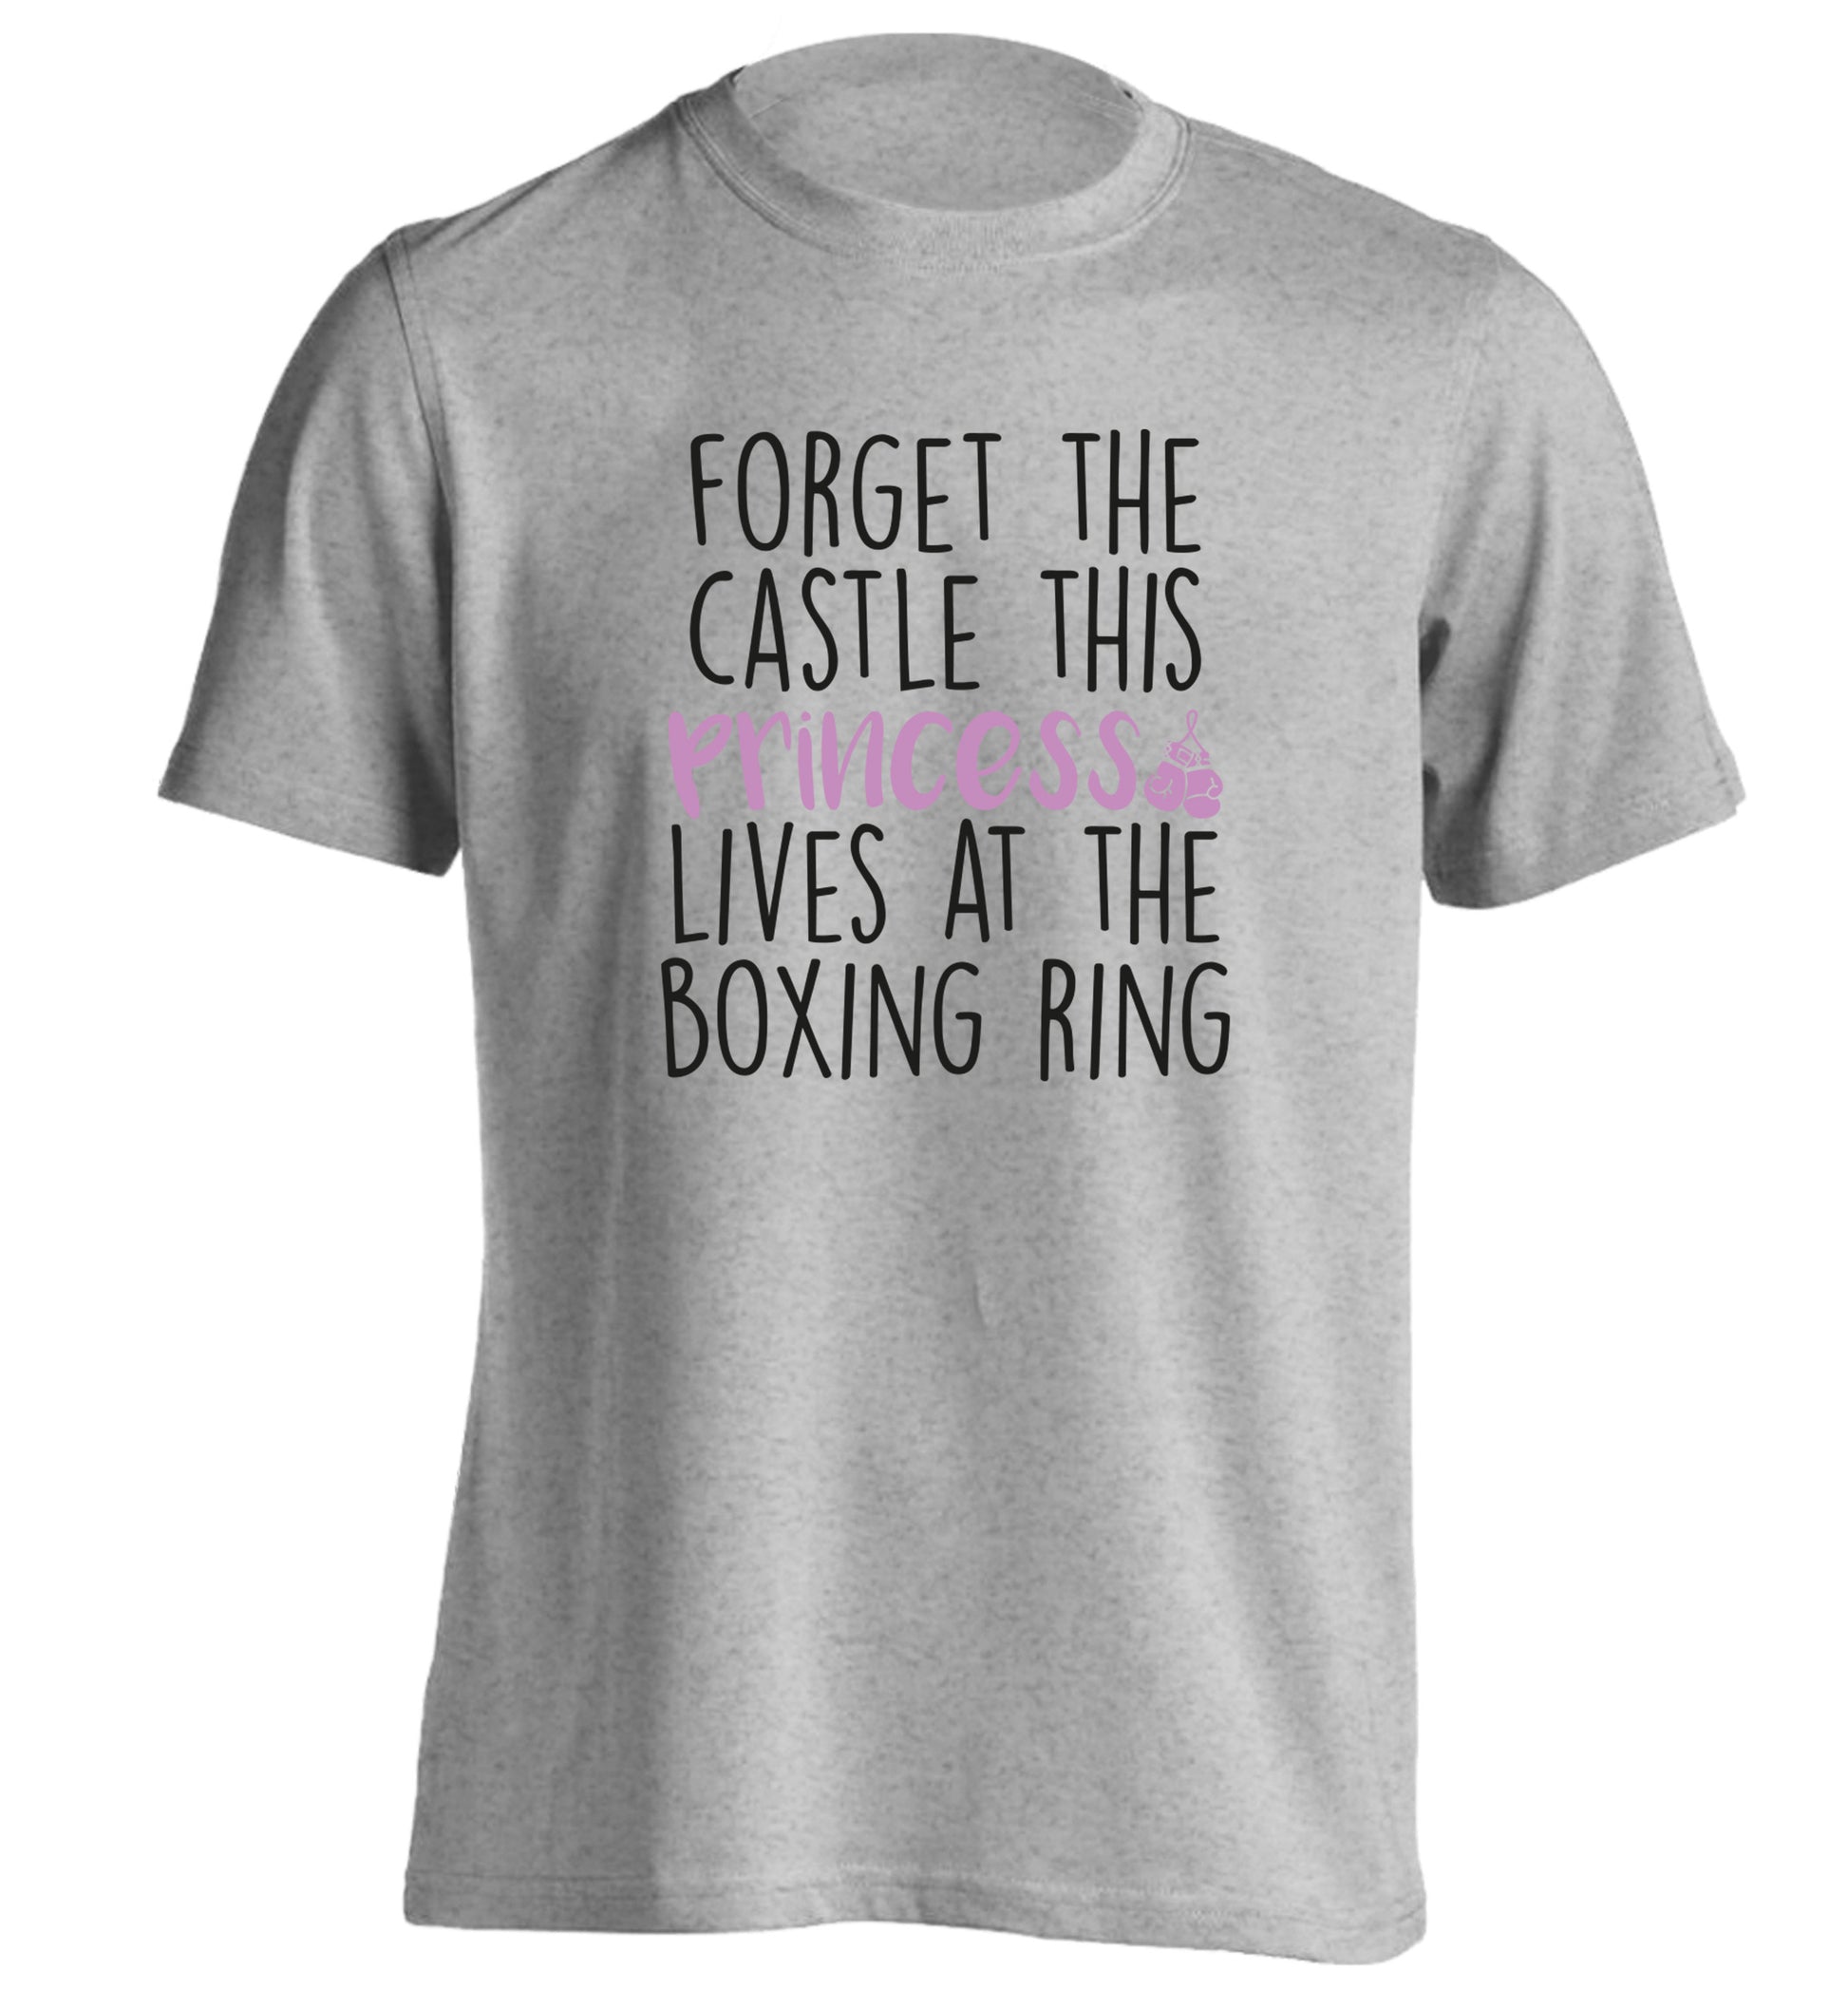 Forget the castle this princess lives at the boxing ring adults unisex grey Tshirt 2XL